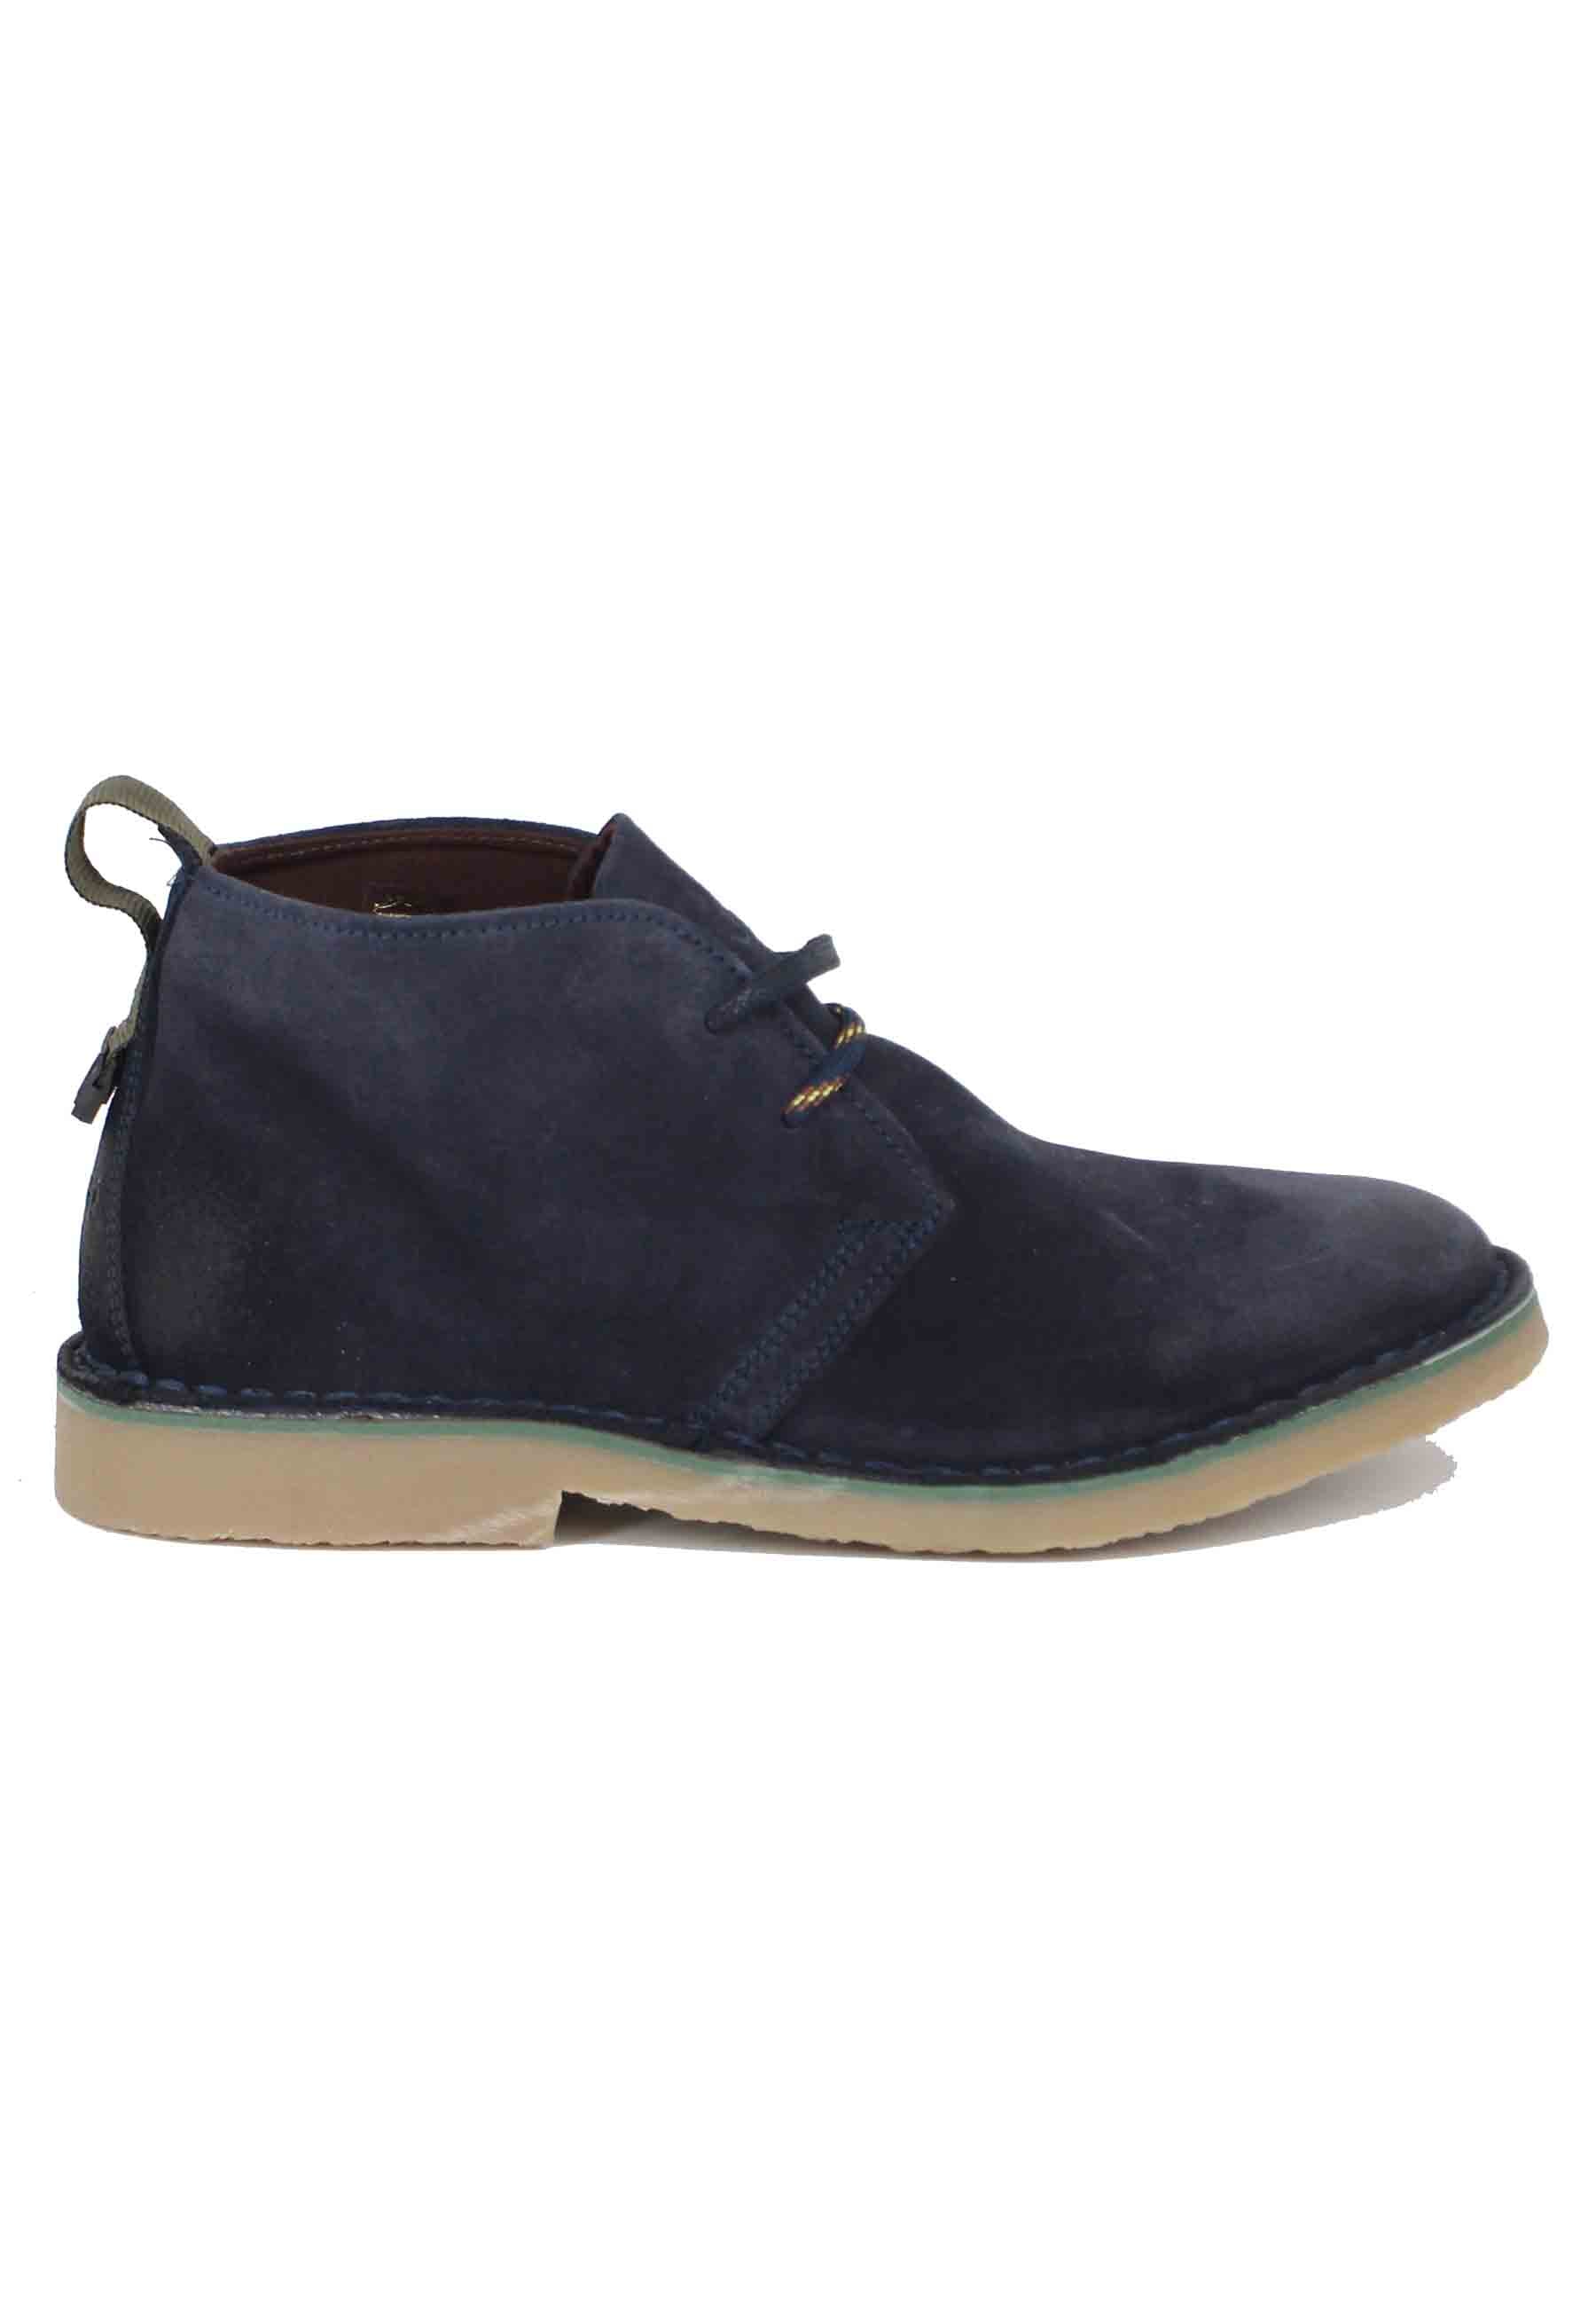 Overland men's ankle boots in blue suede with crepe sole